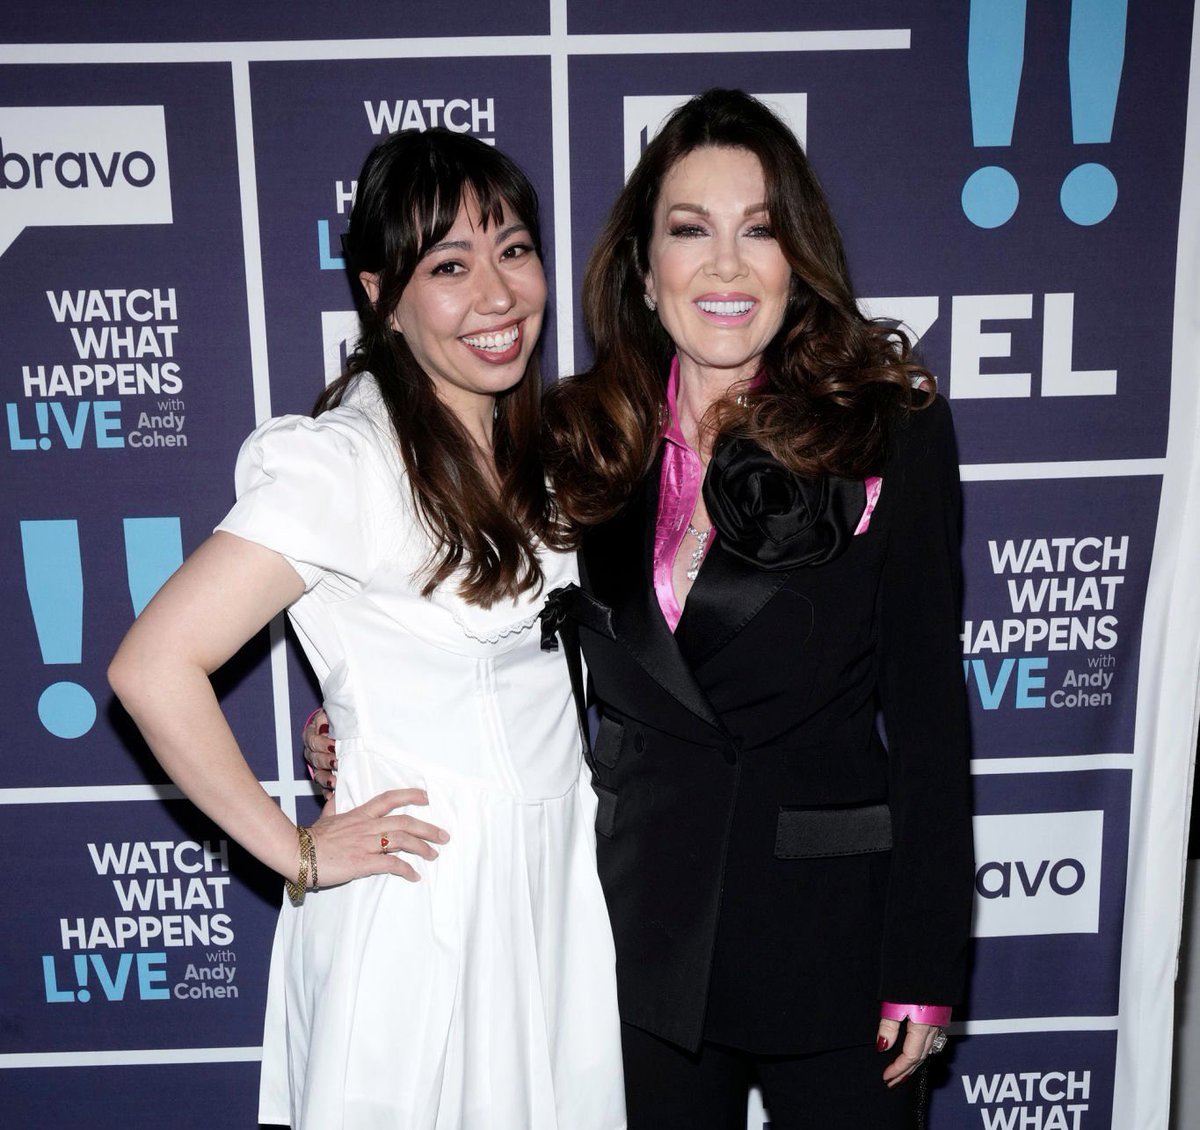 Lisa Vanderpump and @mikiannmaddox photographed on the blue carpet at Watch What Happens Live! on Monday. #WWHL